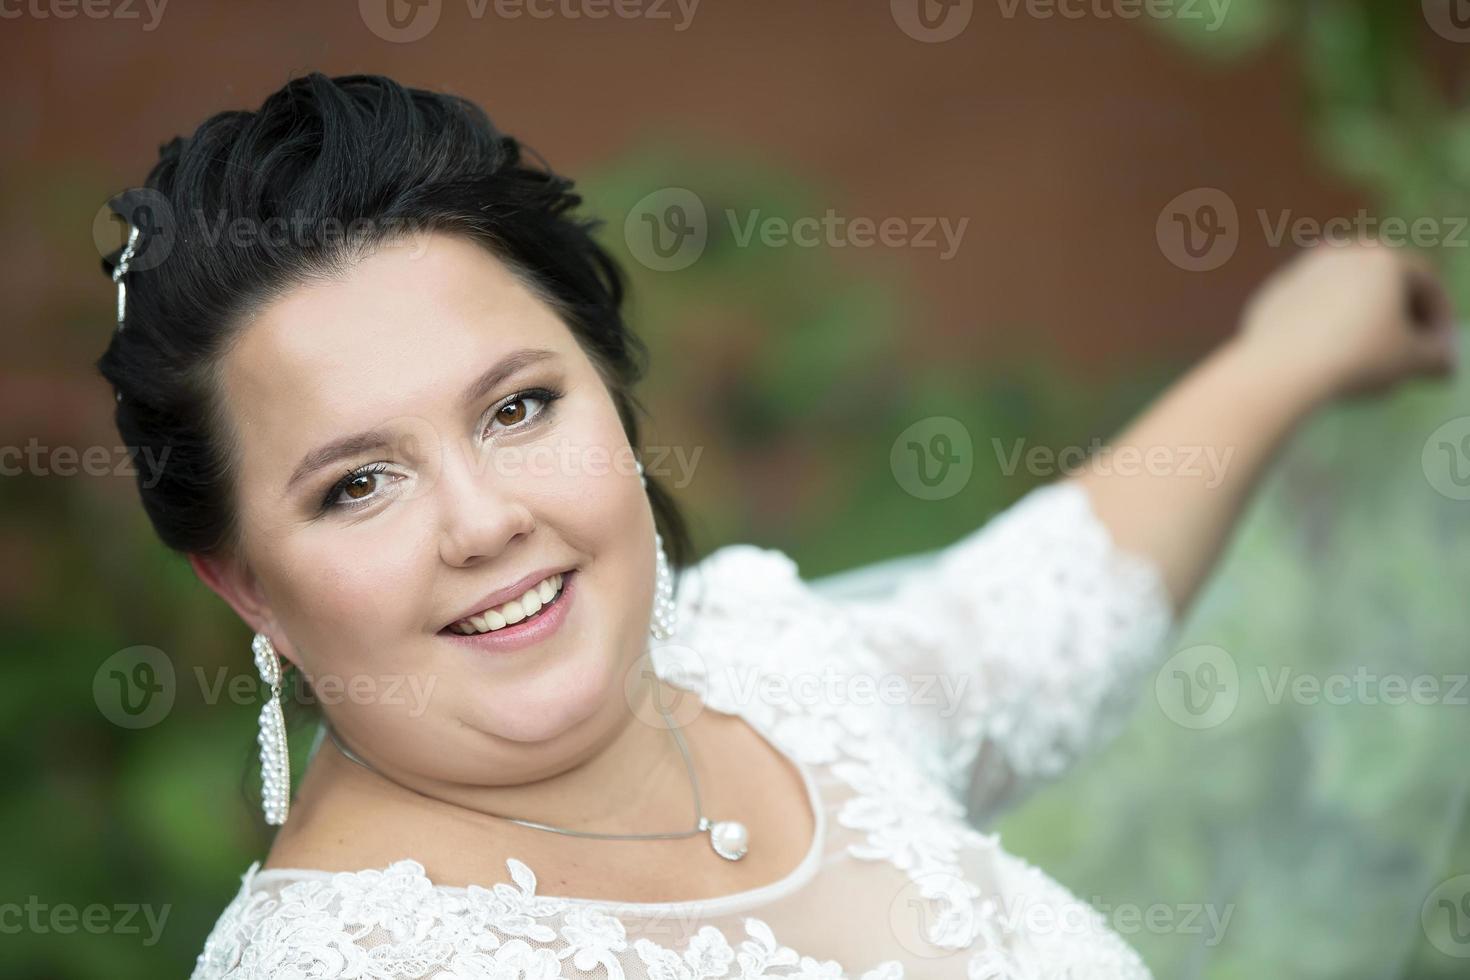 Close-up portrait of a fat bride.Portrait of a plump bride with a waving veil against a background of summer greenery. photo